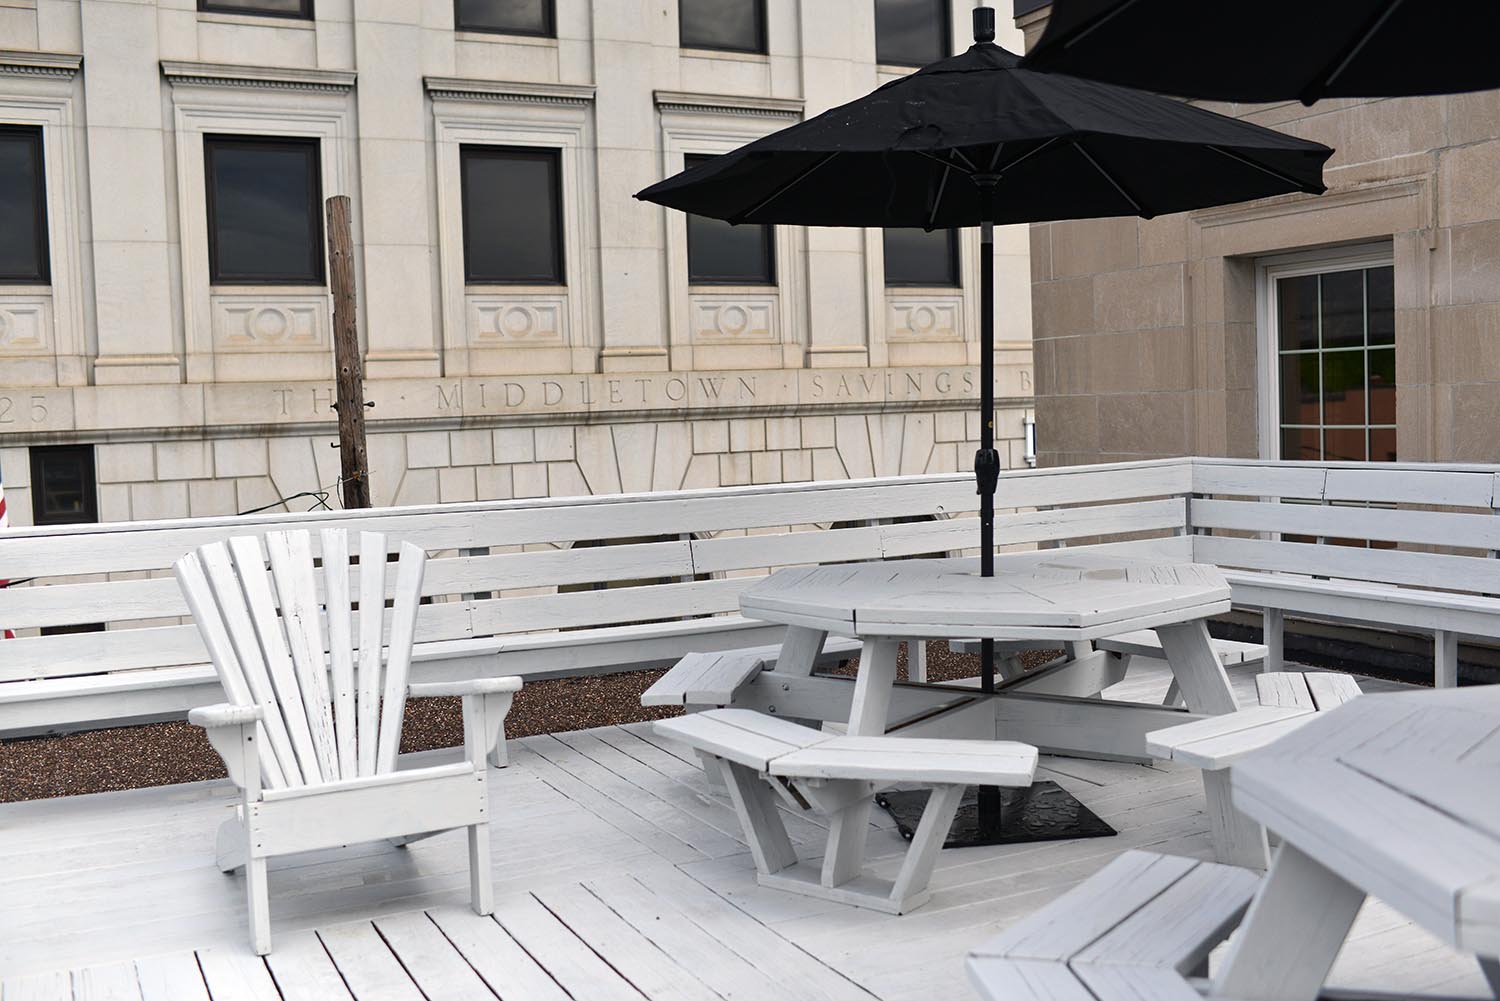 The new building offers employees and guests a rooftop deck and picnic area. 